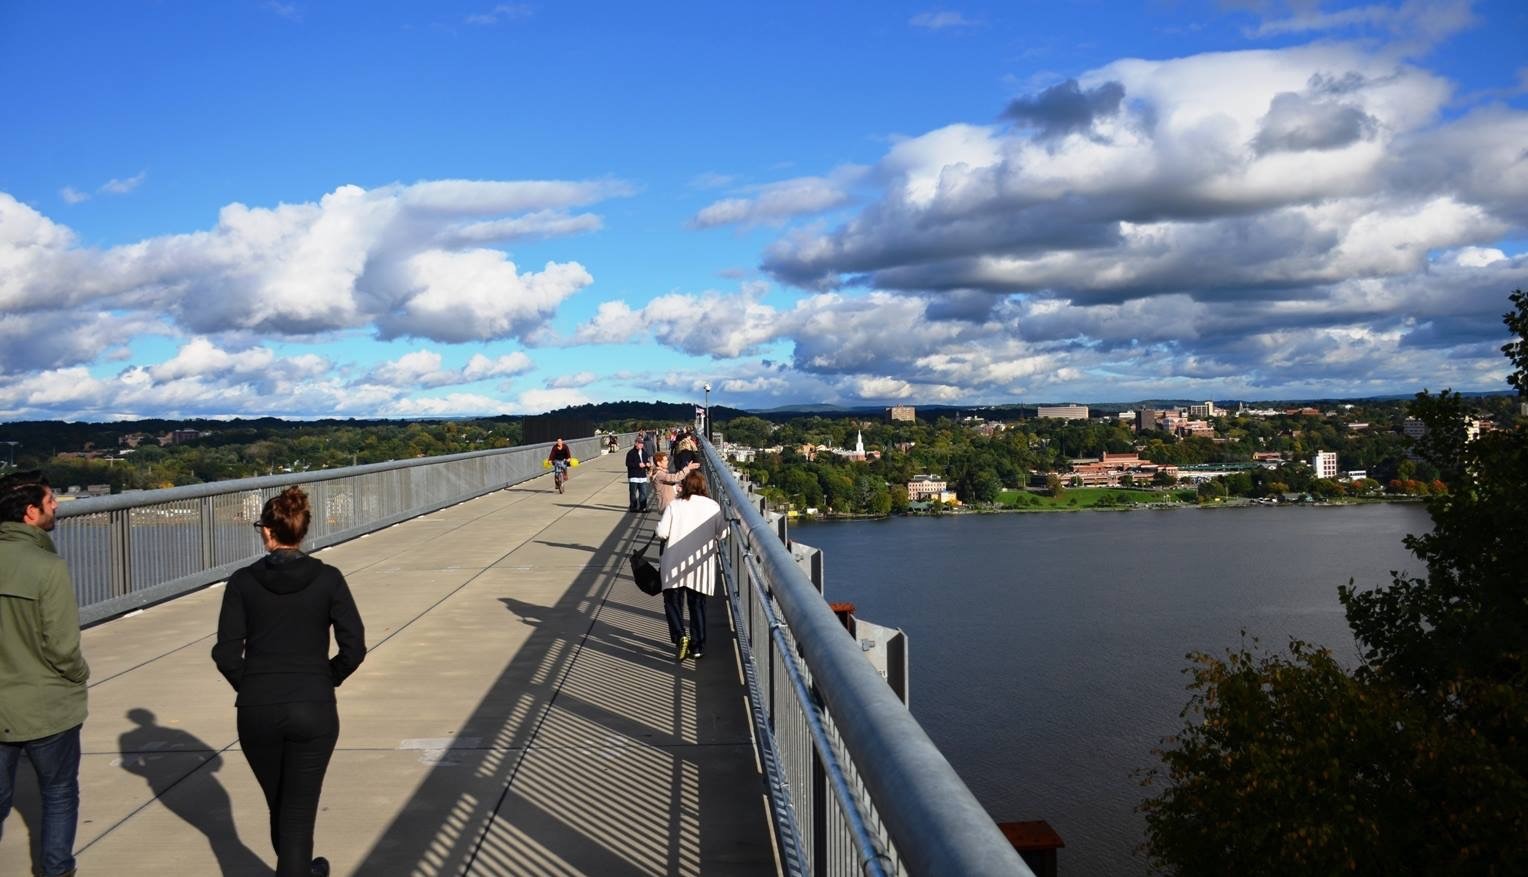 Walkway Over the Hudson State Park with pedestrians in Poughkeepsie